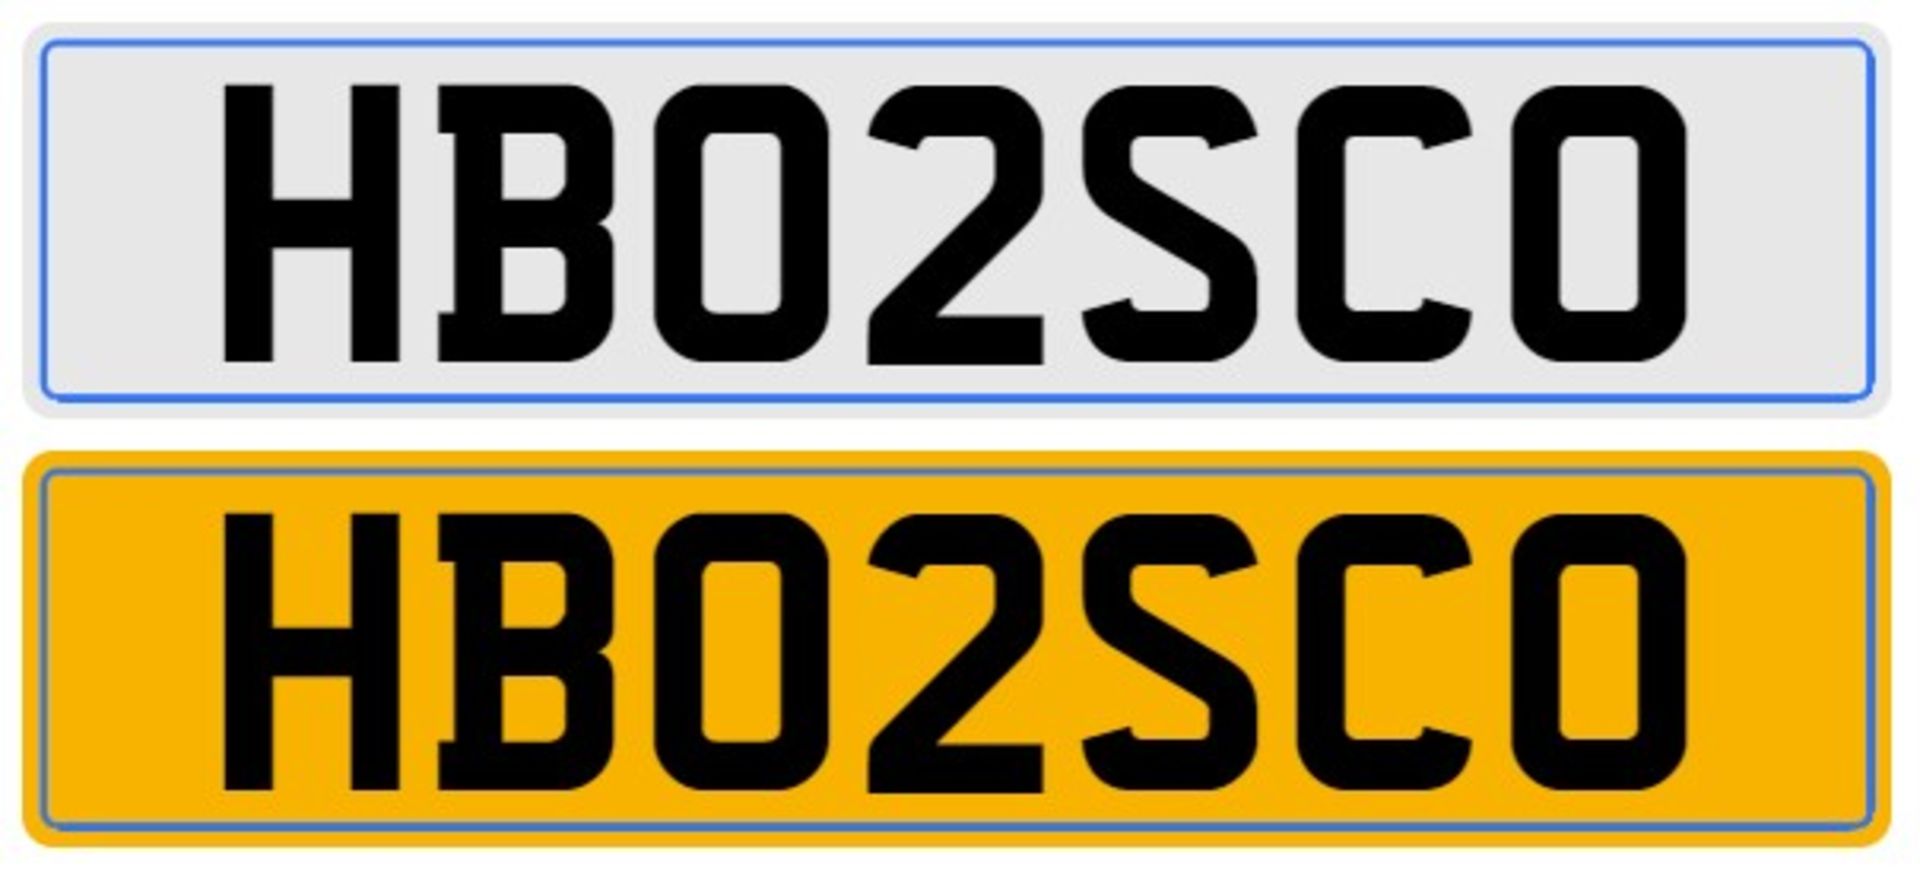 Cherished registration number.: HB02SCO An administration fee of £80 + VAT will be added to the sale